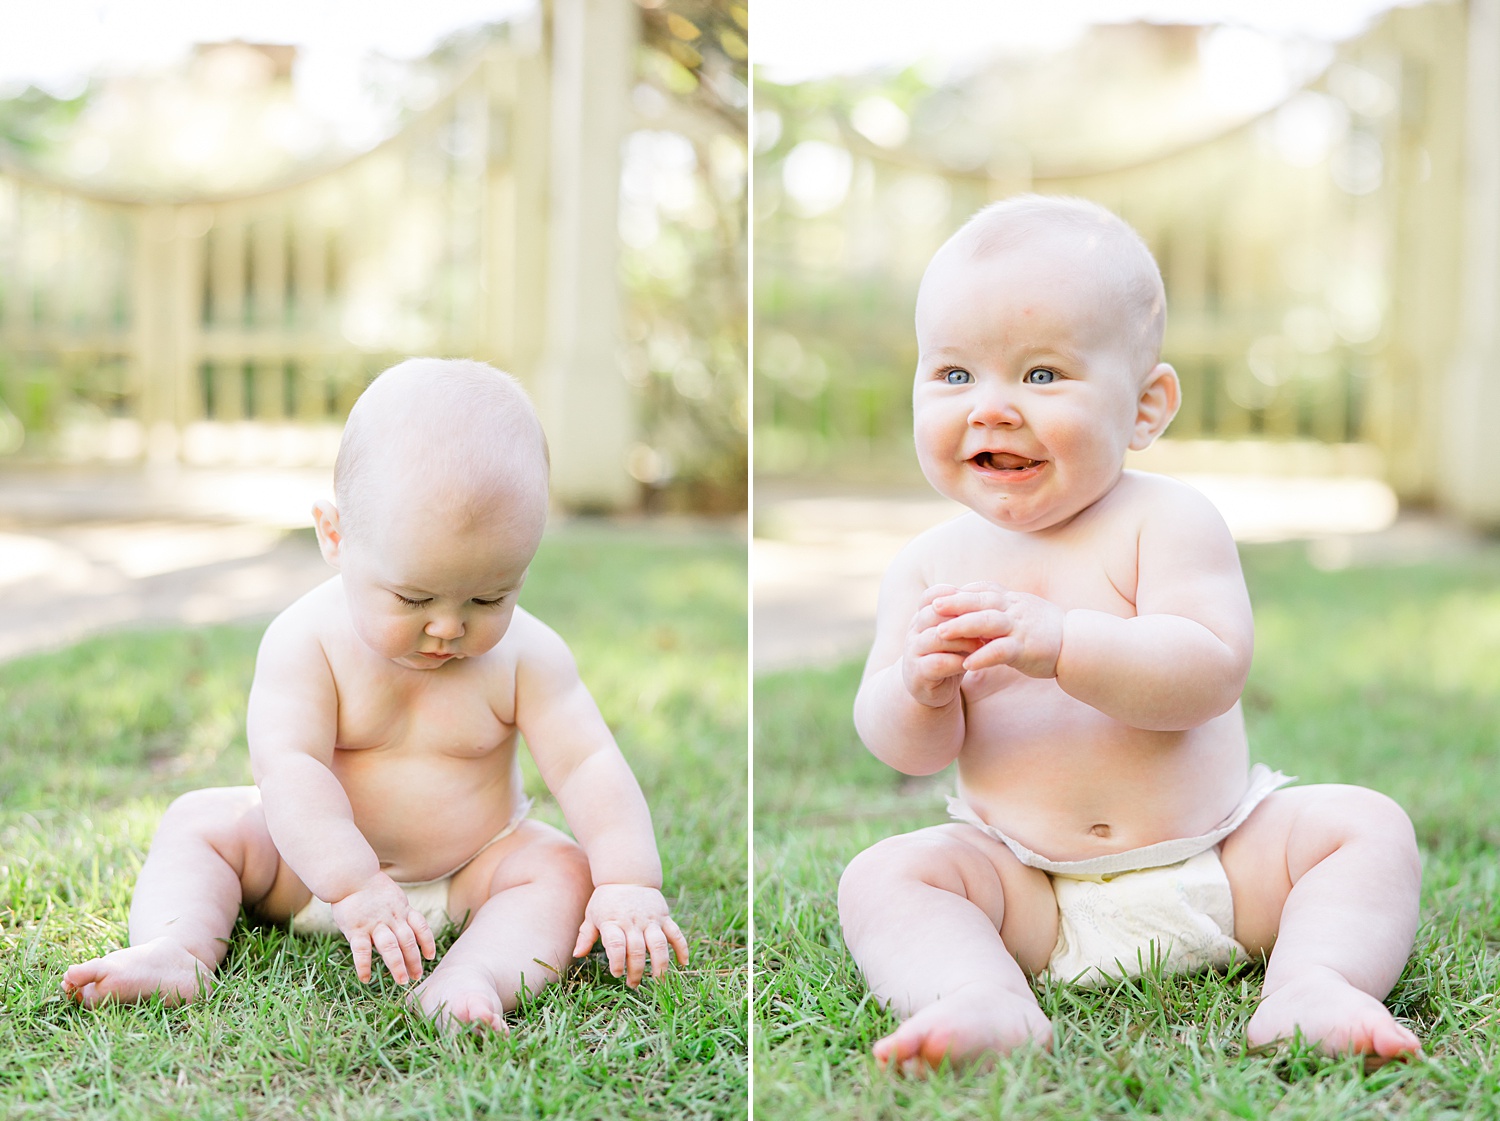 6 month old plays in grass during milestone portraits 